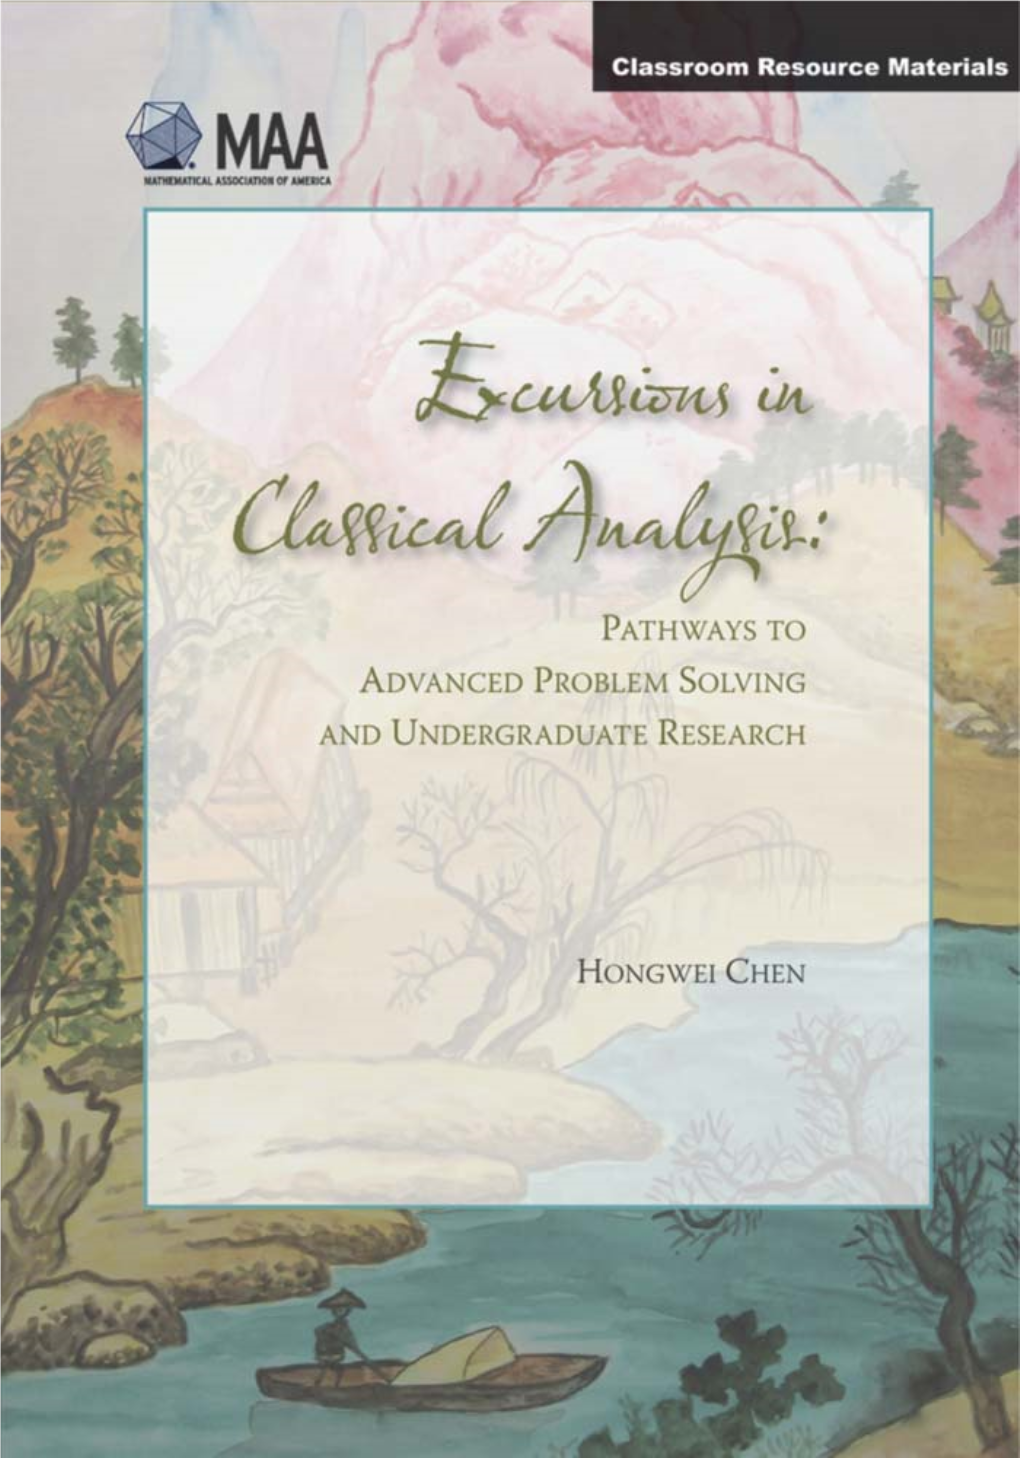 Excursions in Classical Analysis Pathways to Advanced Problem Solving and Undergraduate Research